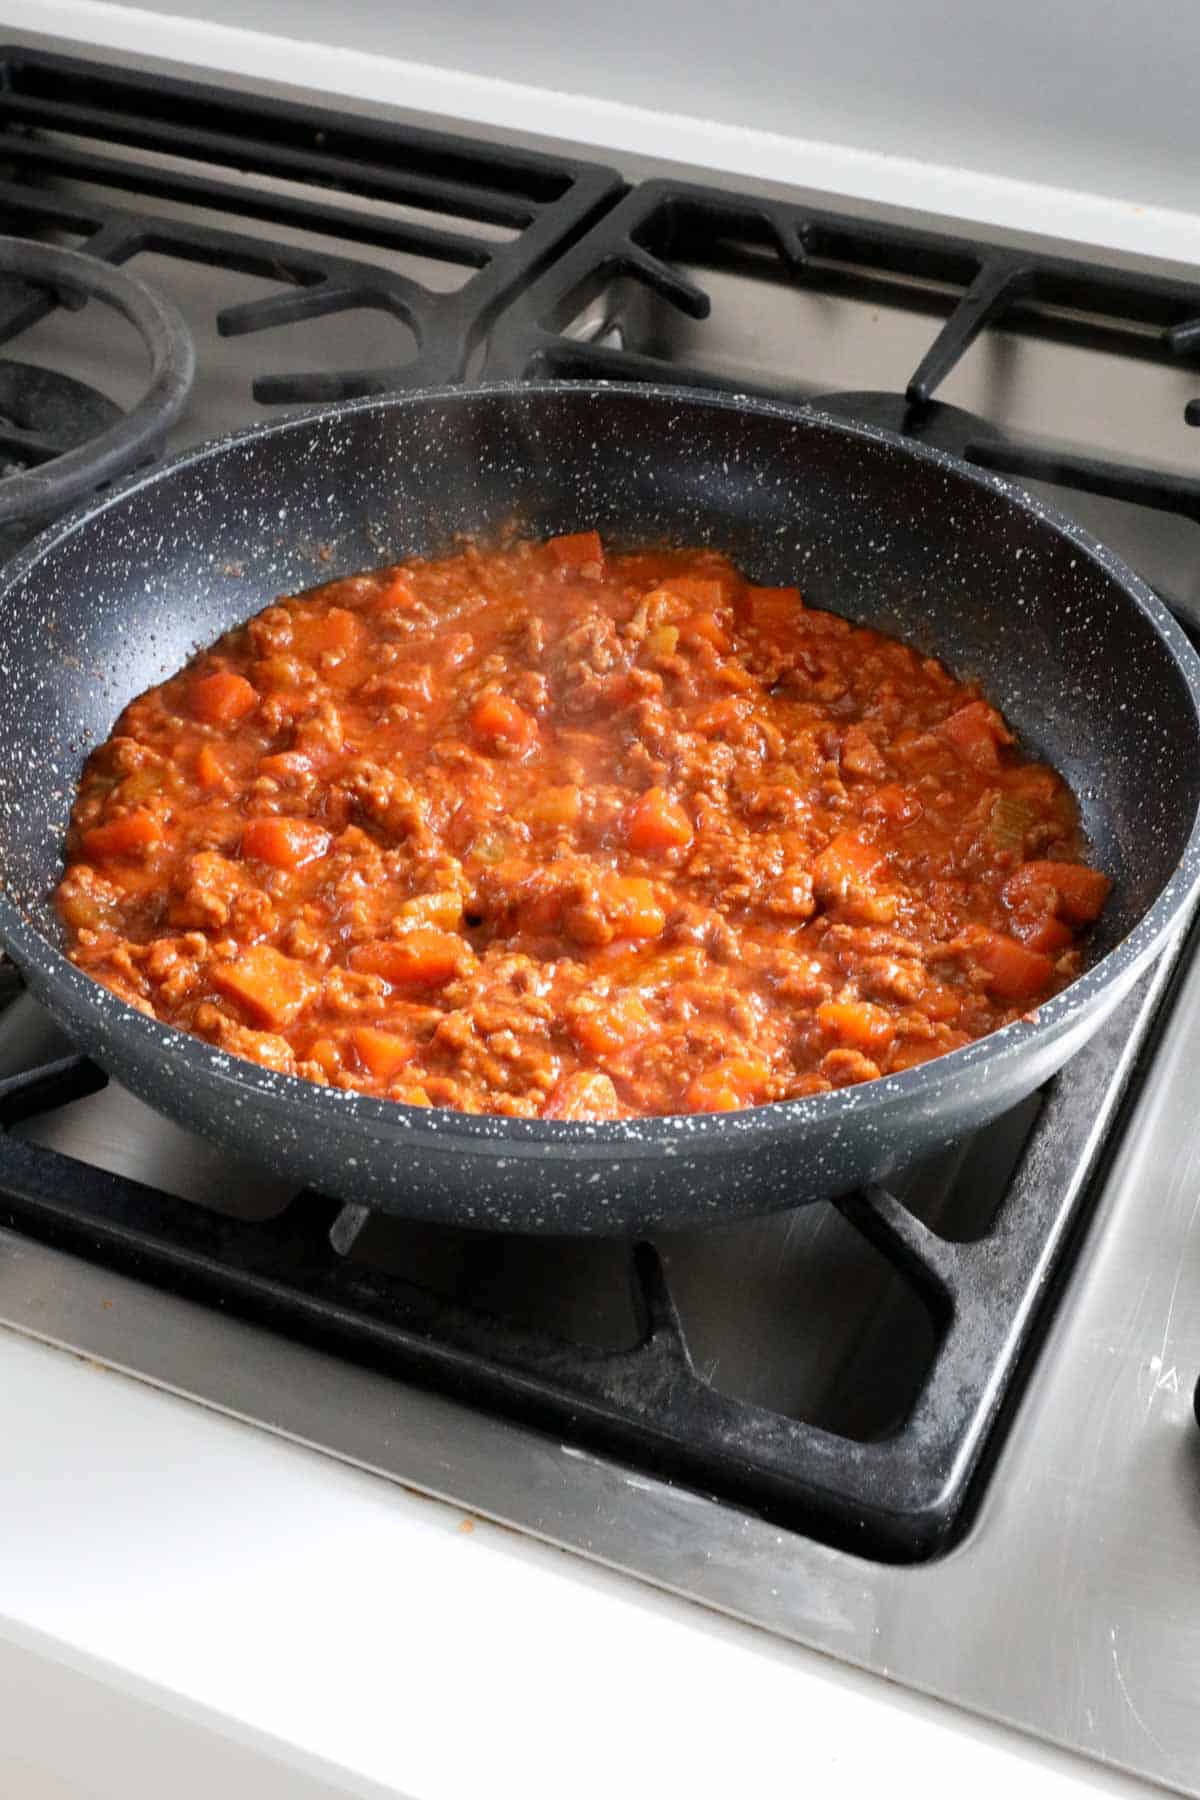 Half the bolognese sauce in a frying pan.